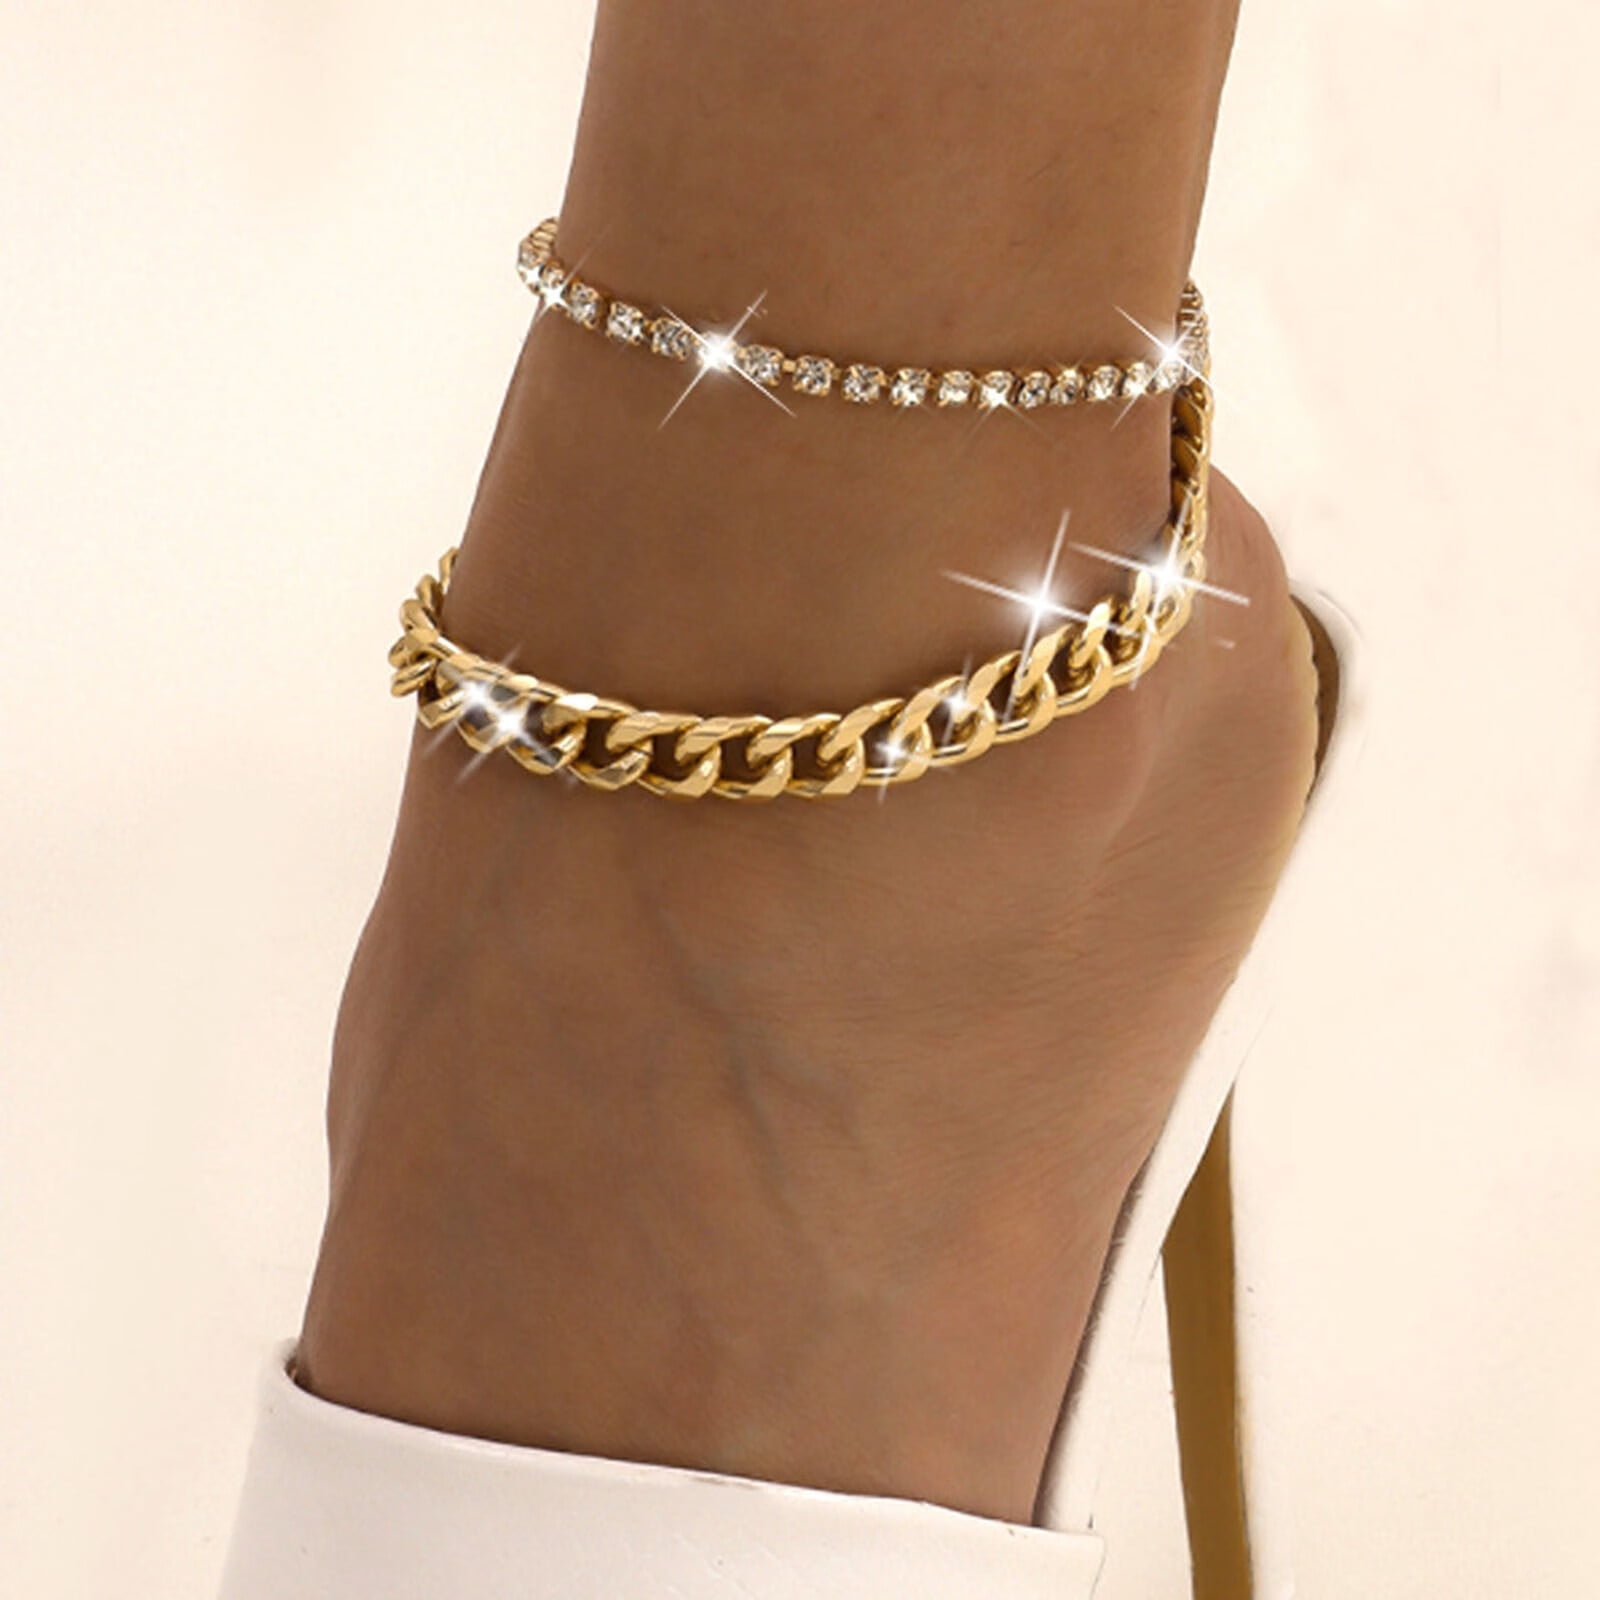 Reclaimed Vintage unisex cord bracelets and anklets with stones | ASOS